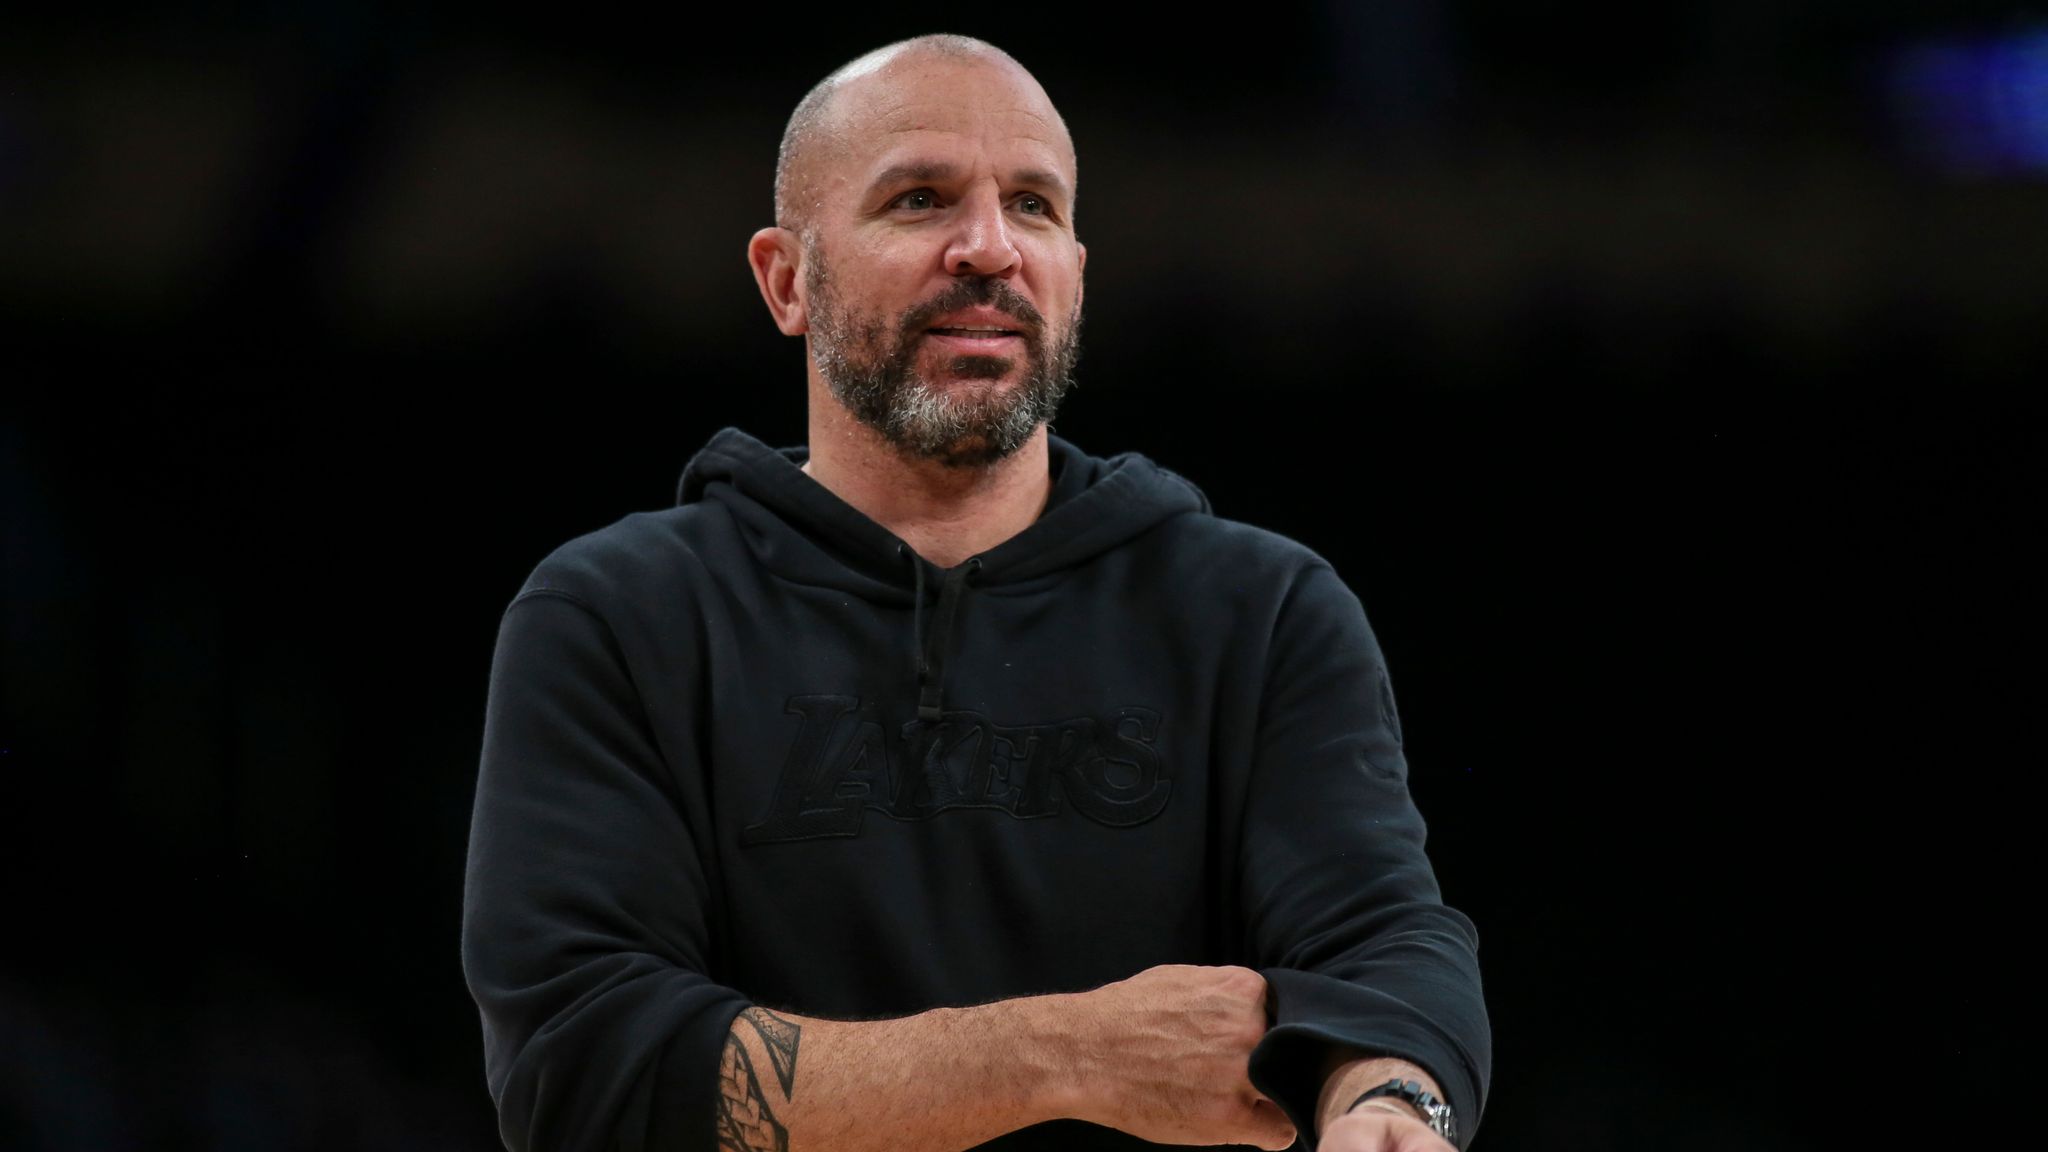 Jason Kidd Is Expected to Leave as Nets Head Coach - The New York Times